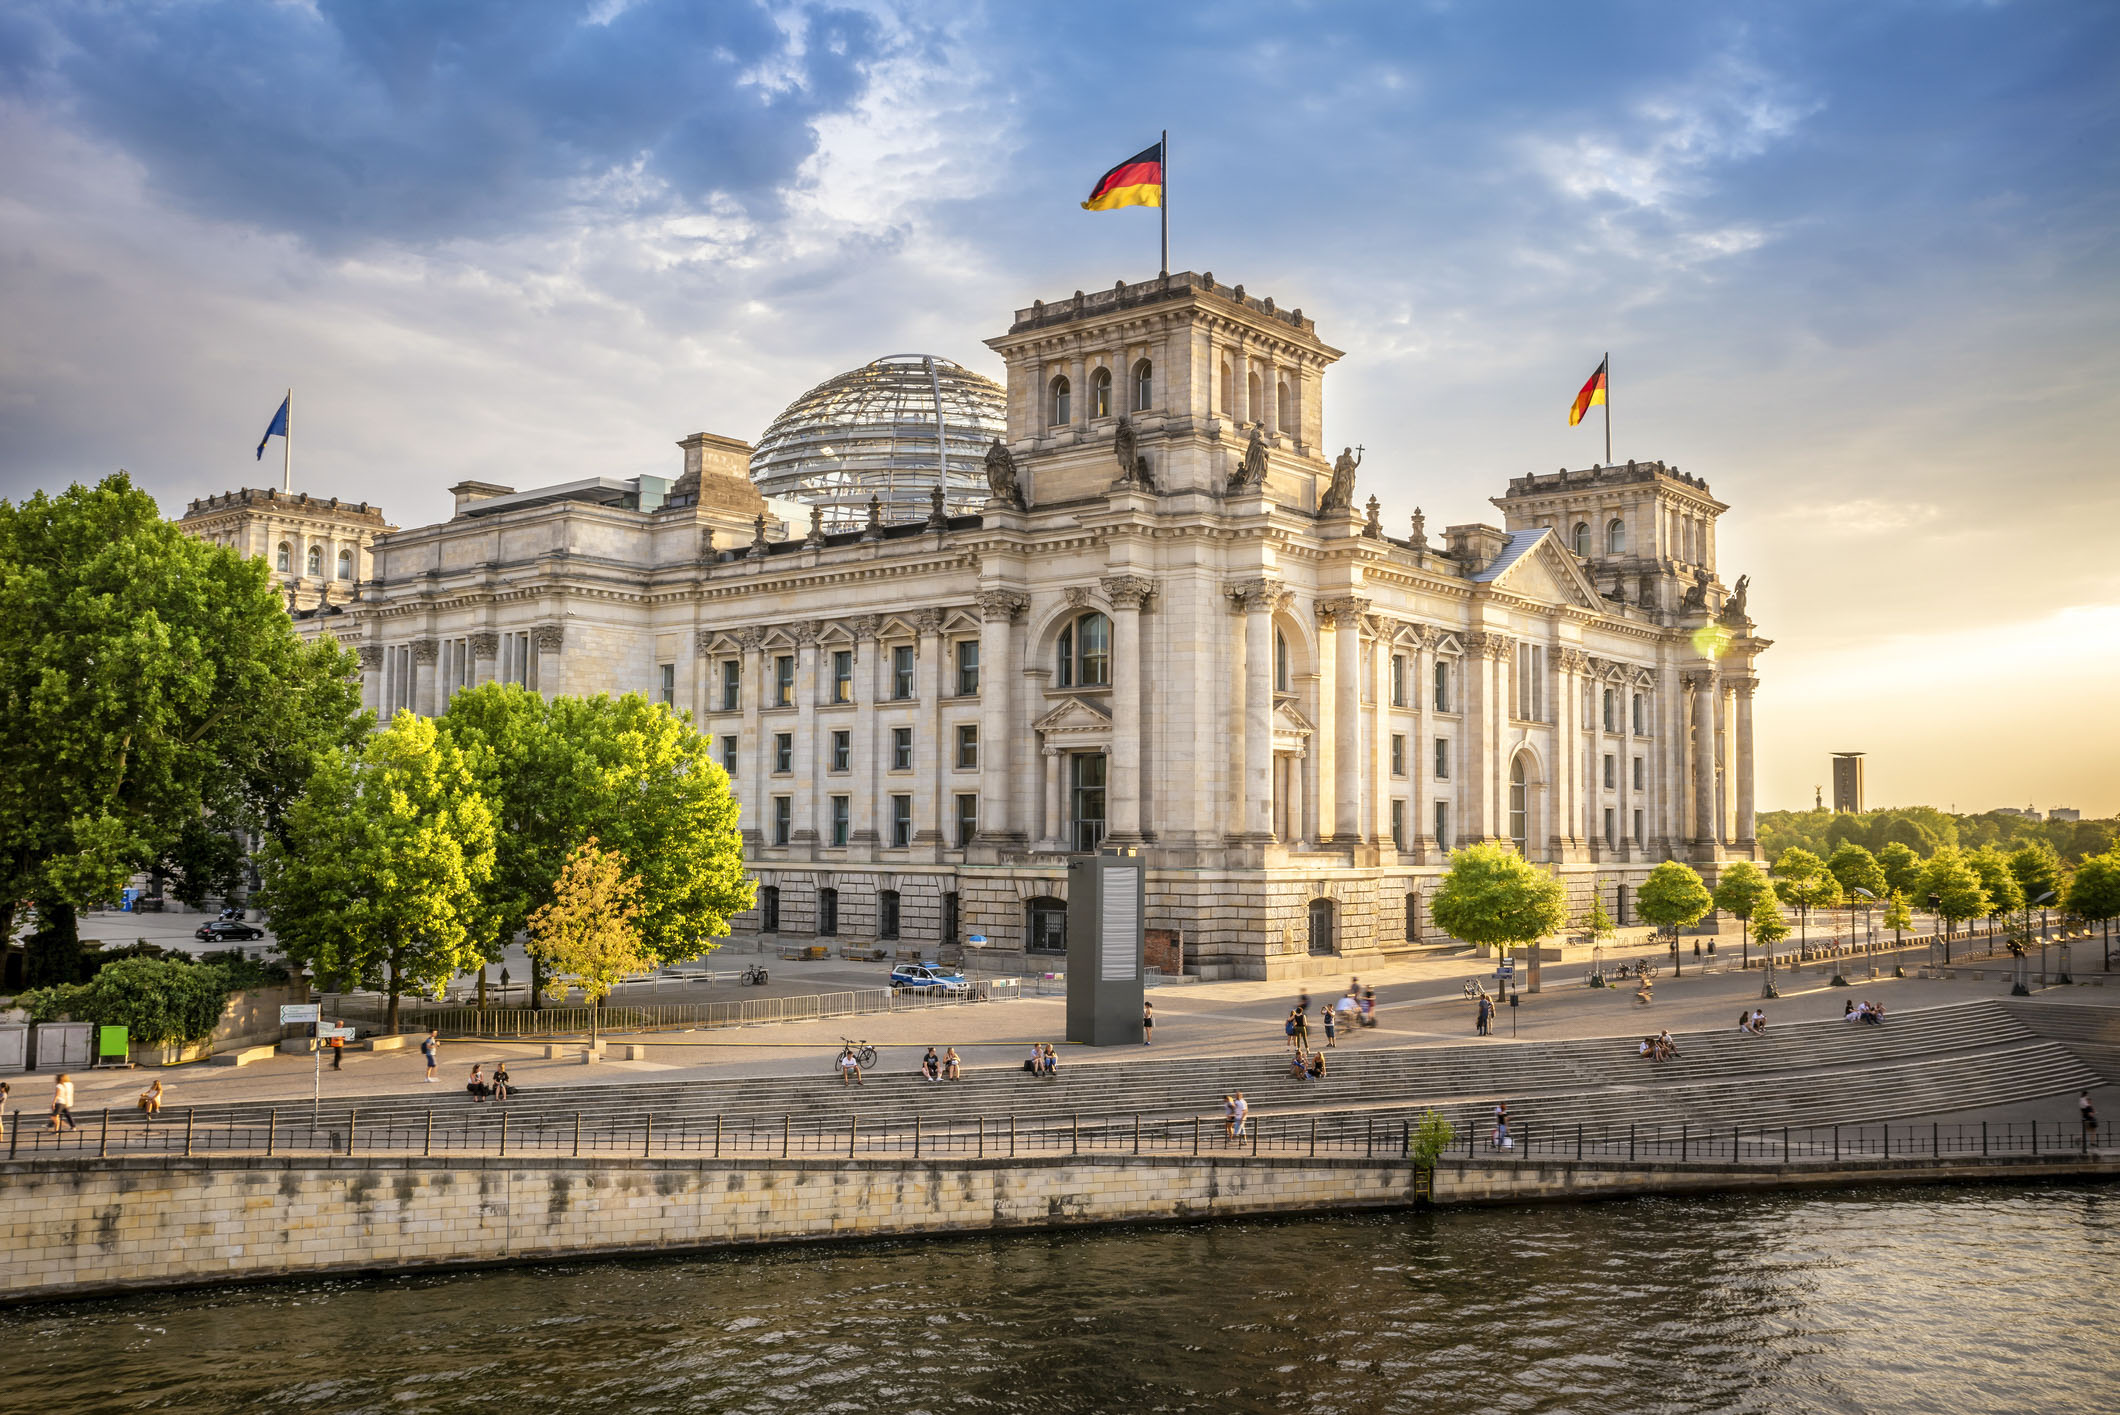 Study abroad in Germany and visit Belgium and France as you learn about international politics and the European Union. Develop your intercultural communication and interpersonal skills by being immersed in the culture of Germany. Government district in Berlin